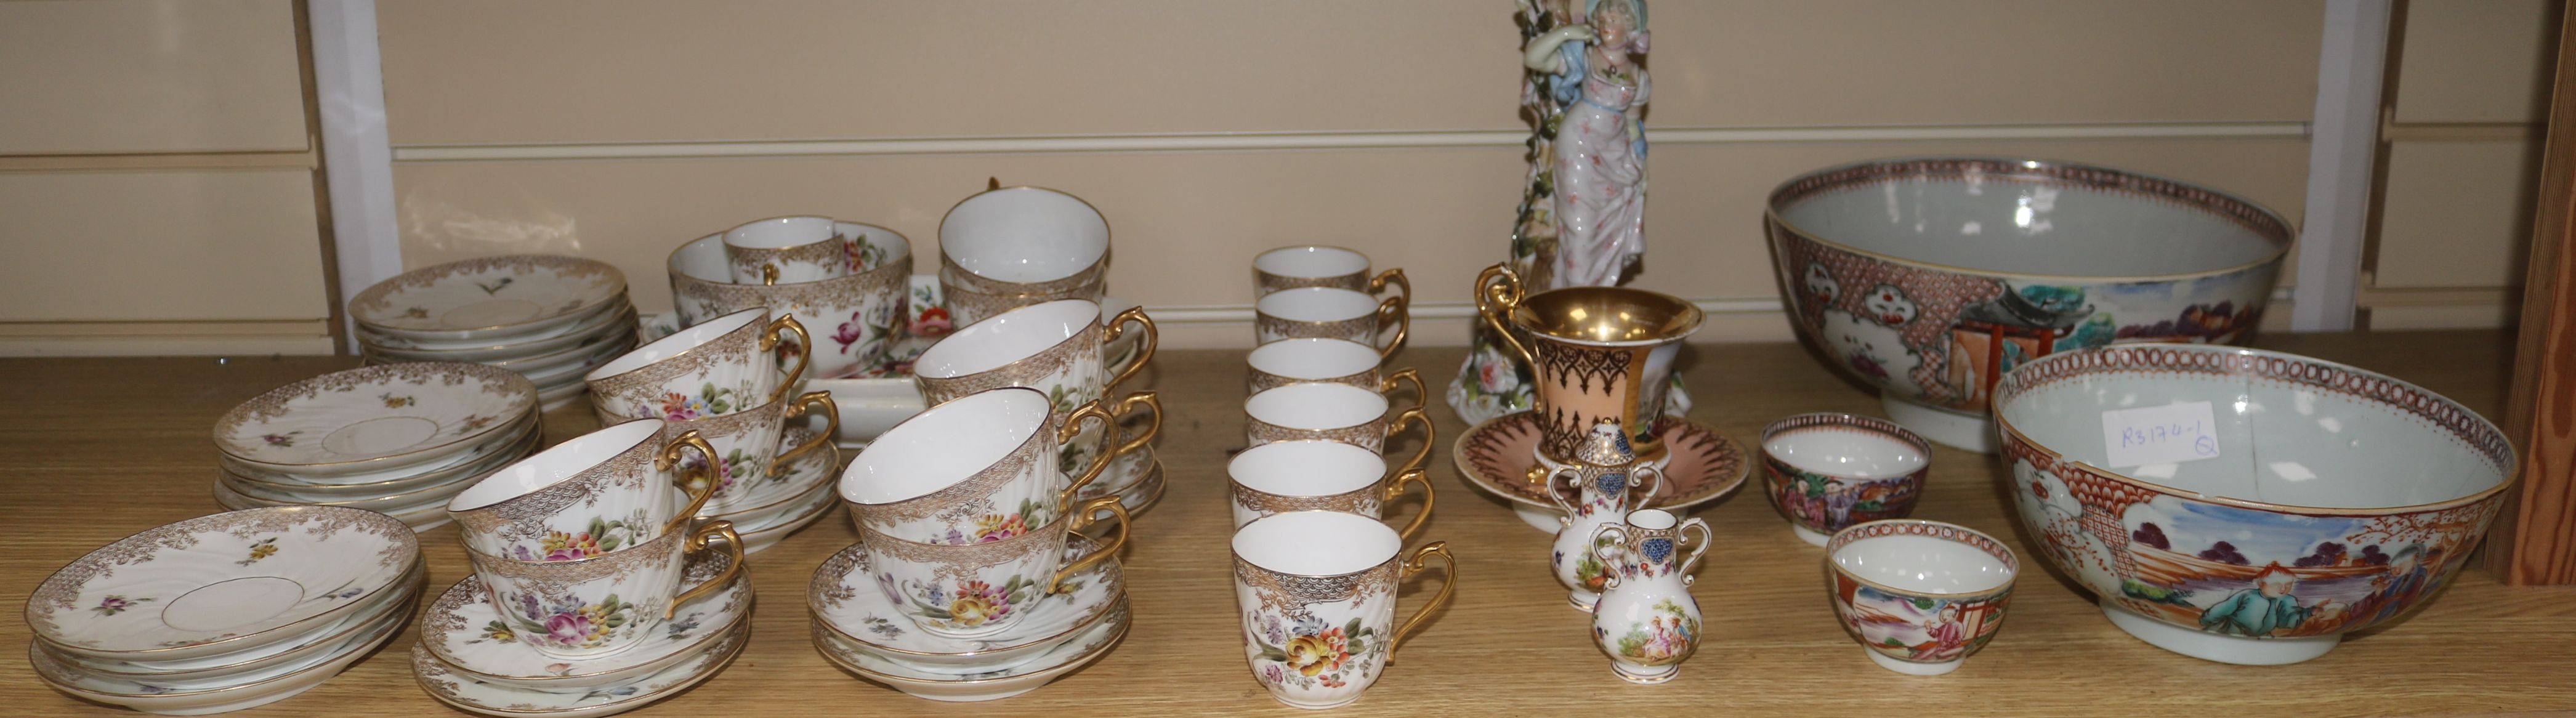 Three Chinese famille rose bowls, a Limoges teaset, a Paris porcelain cup and saucer etc